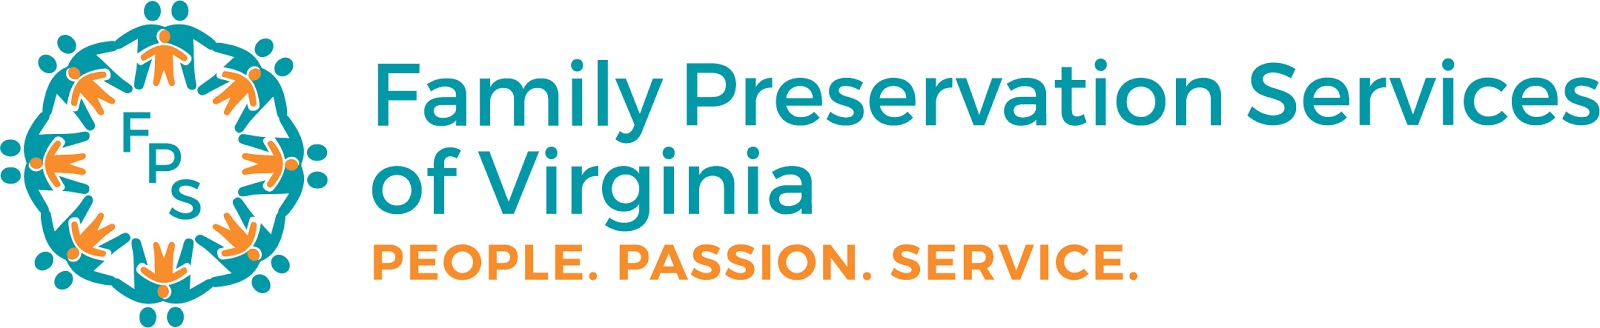 Family Preservation Services - Lynchburg Office